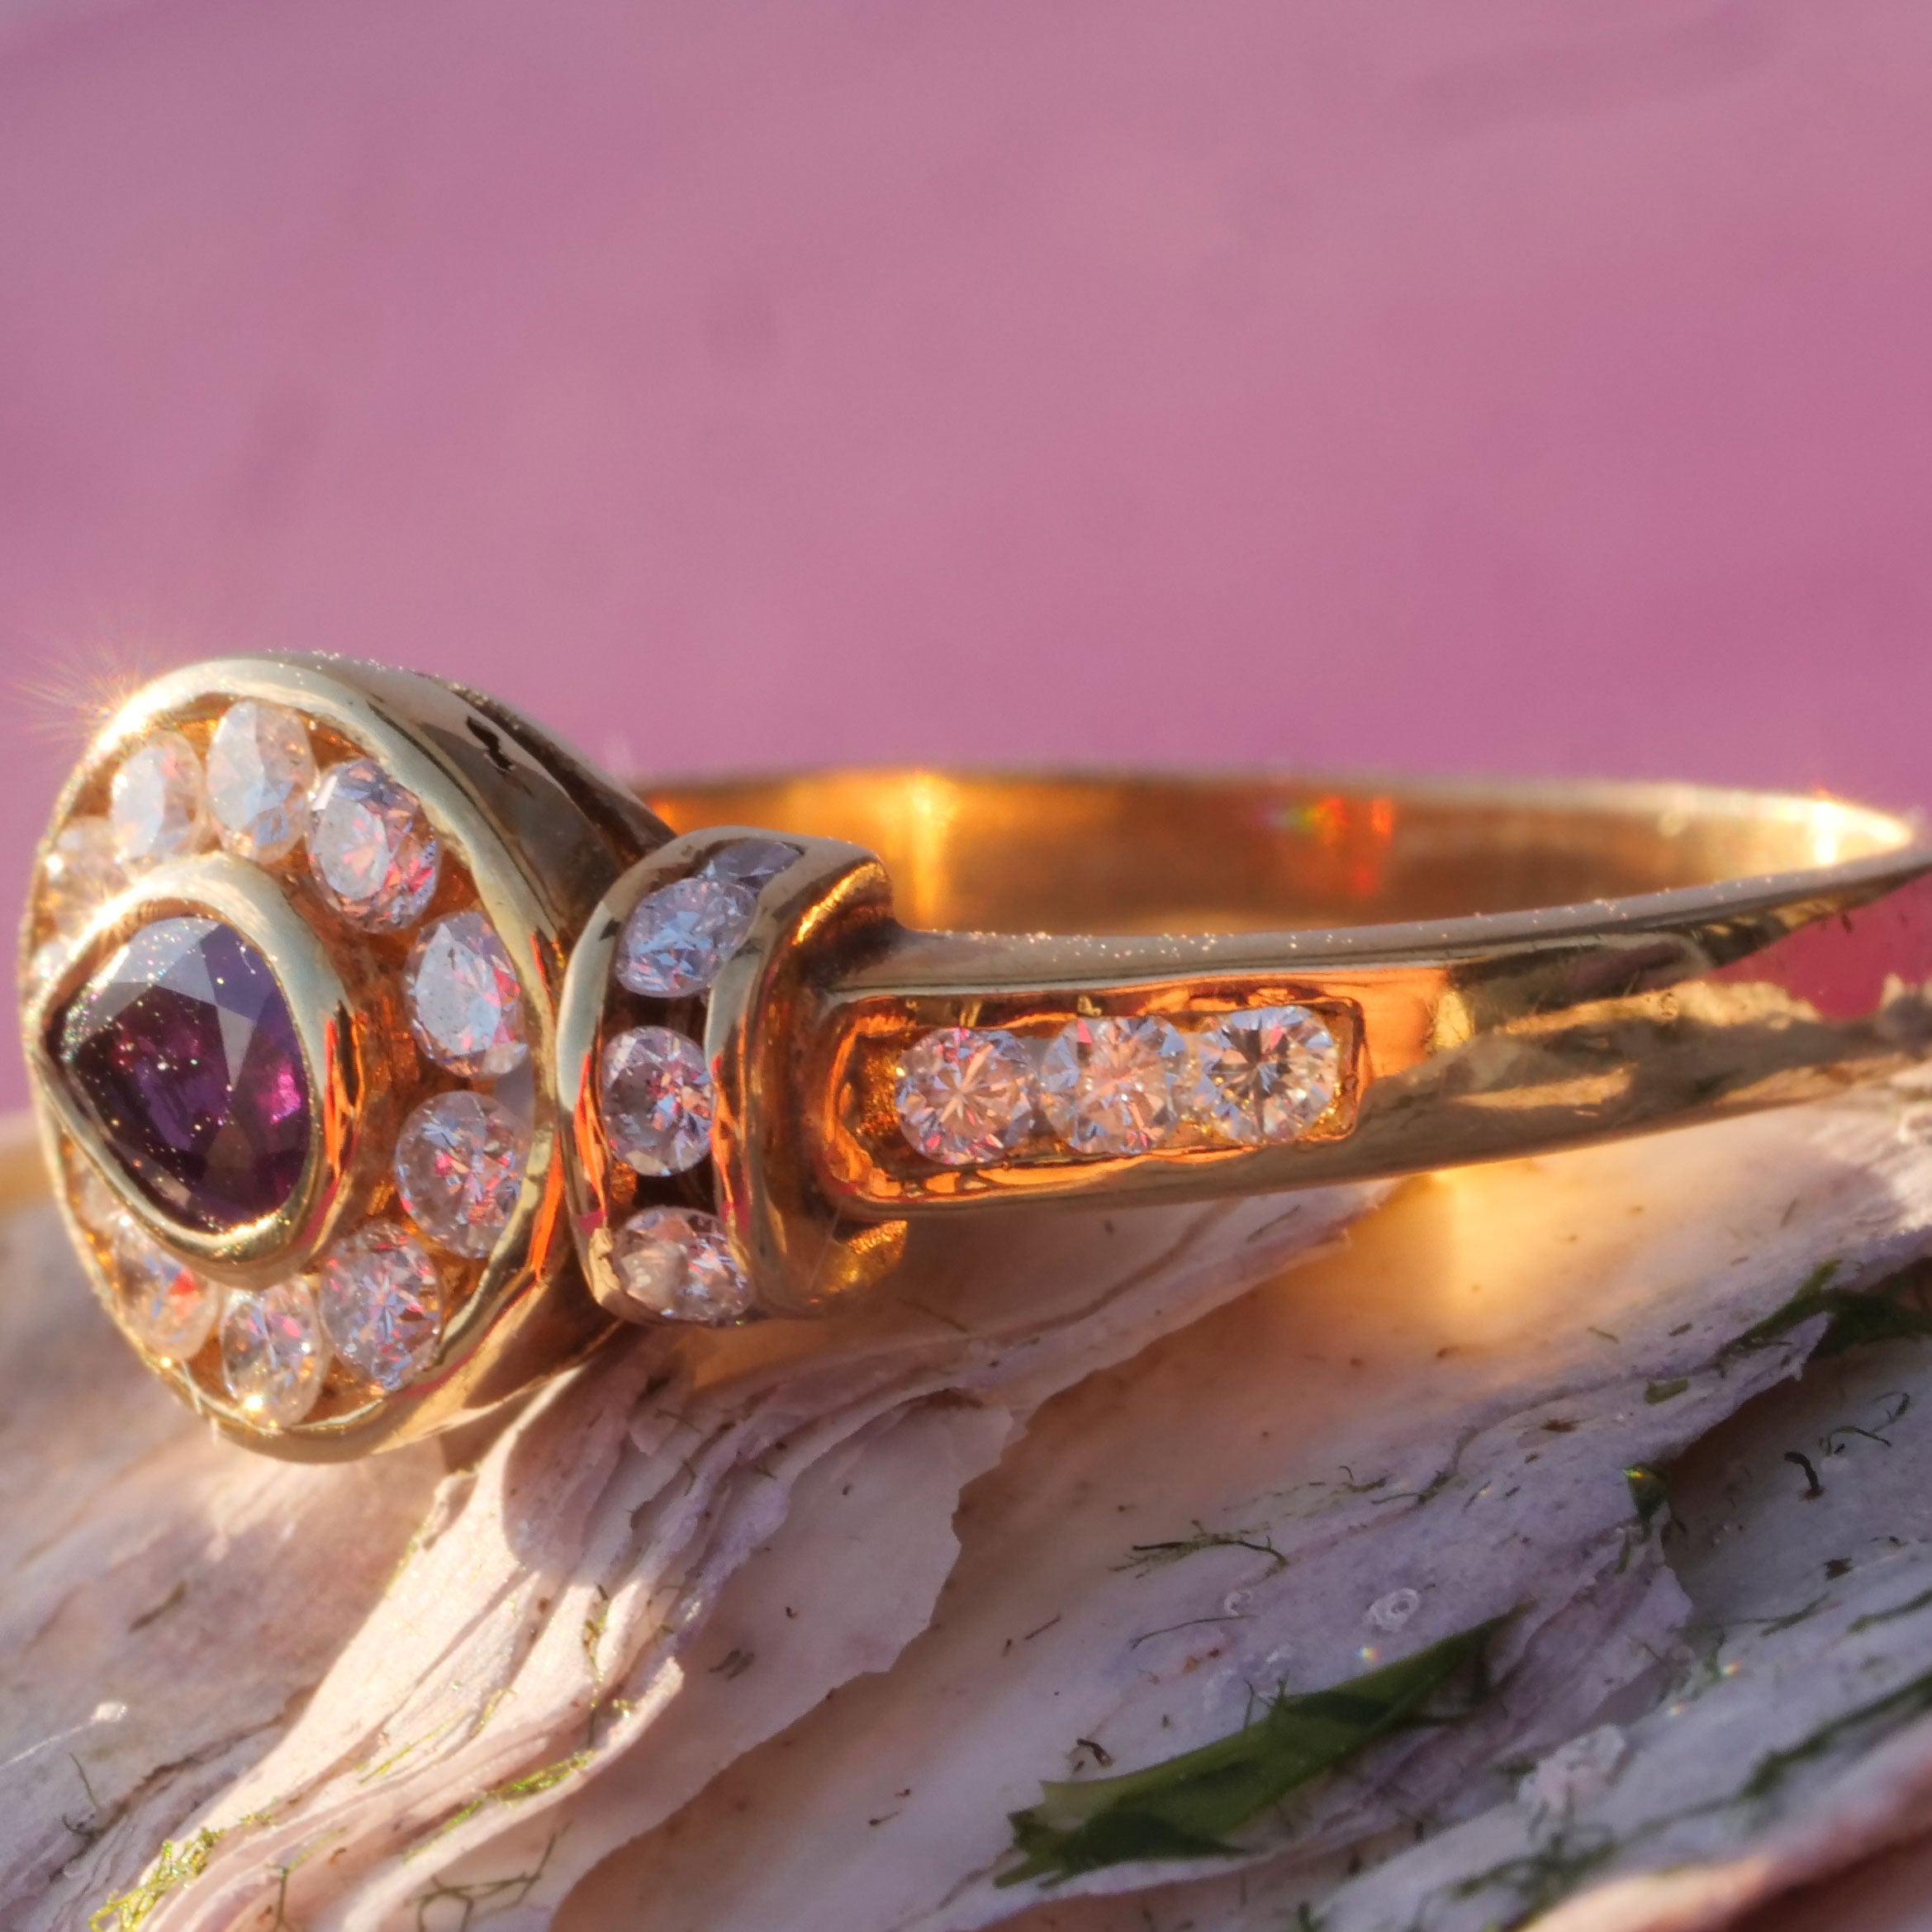 this ring will look so pretty on your hands, a pinkish red Ruby of 0.15 ct surrounded by fullcut diamonds approx. 0.25 ct, W (white) / SI (small inclusion), 18 kt yellow gold, brilliants setting also on ring shoulders, lovely workshop by a german